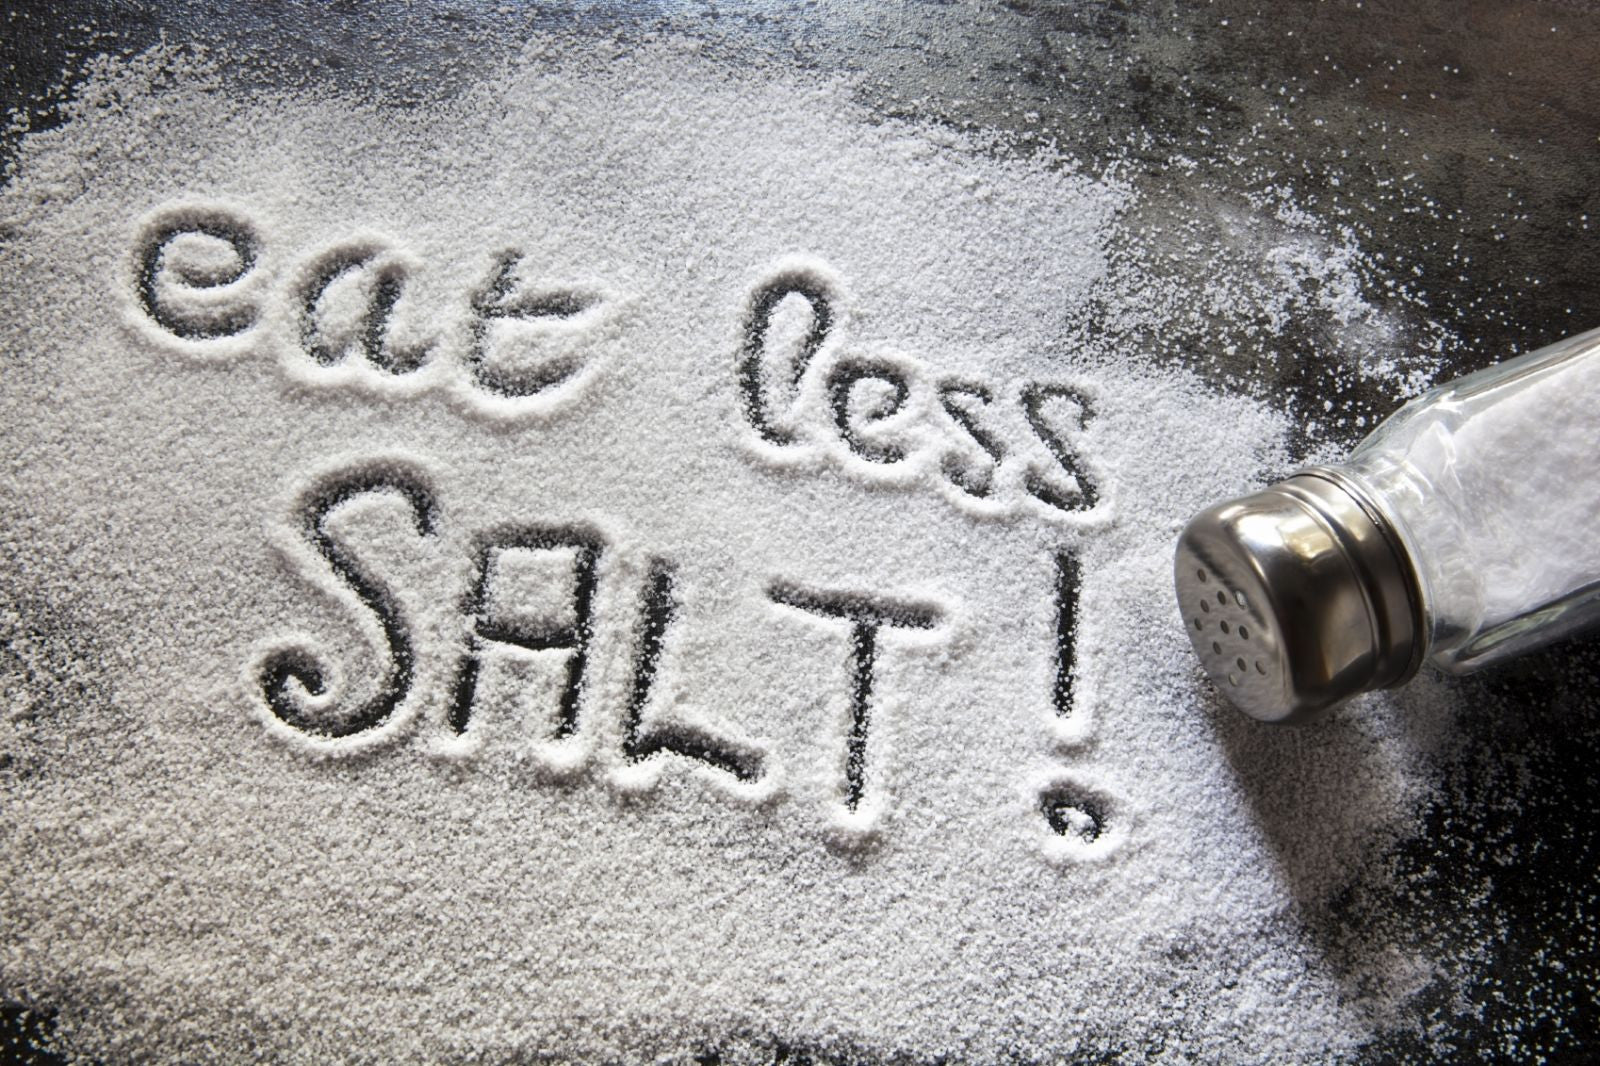 Constantly waking up to pee at night? Eat less salt, says study.